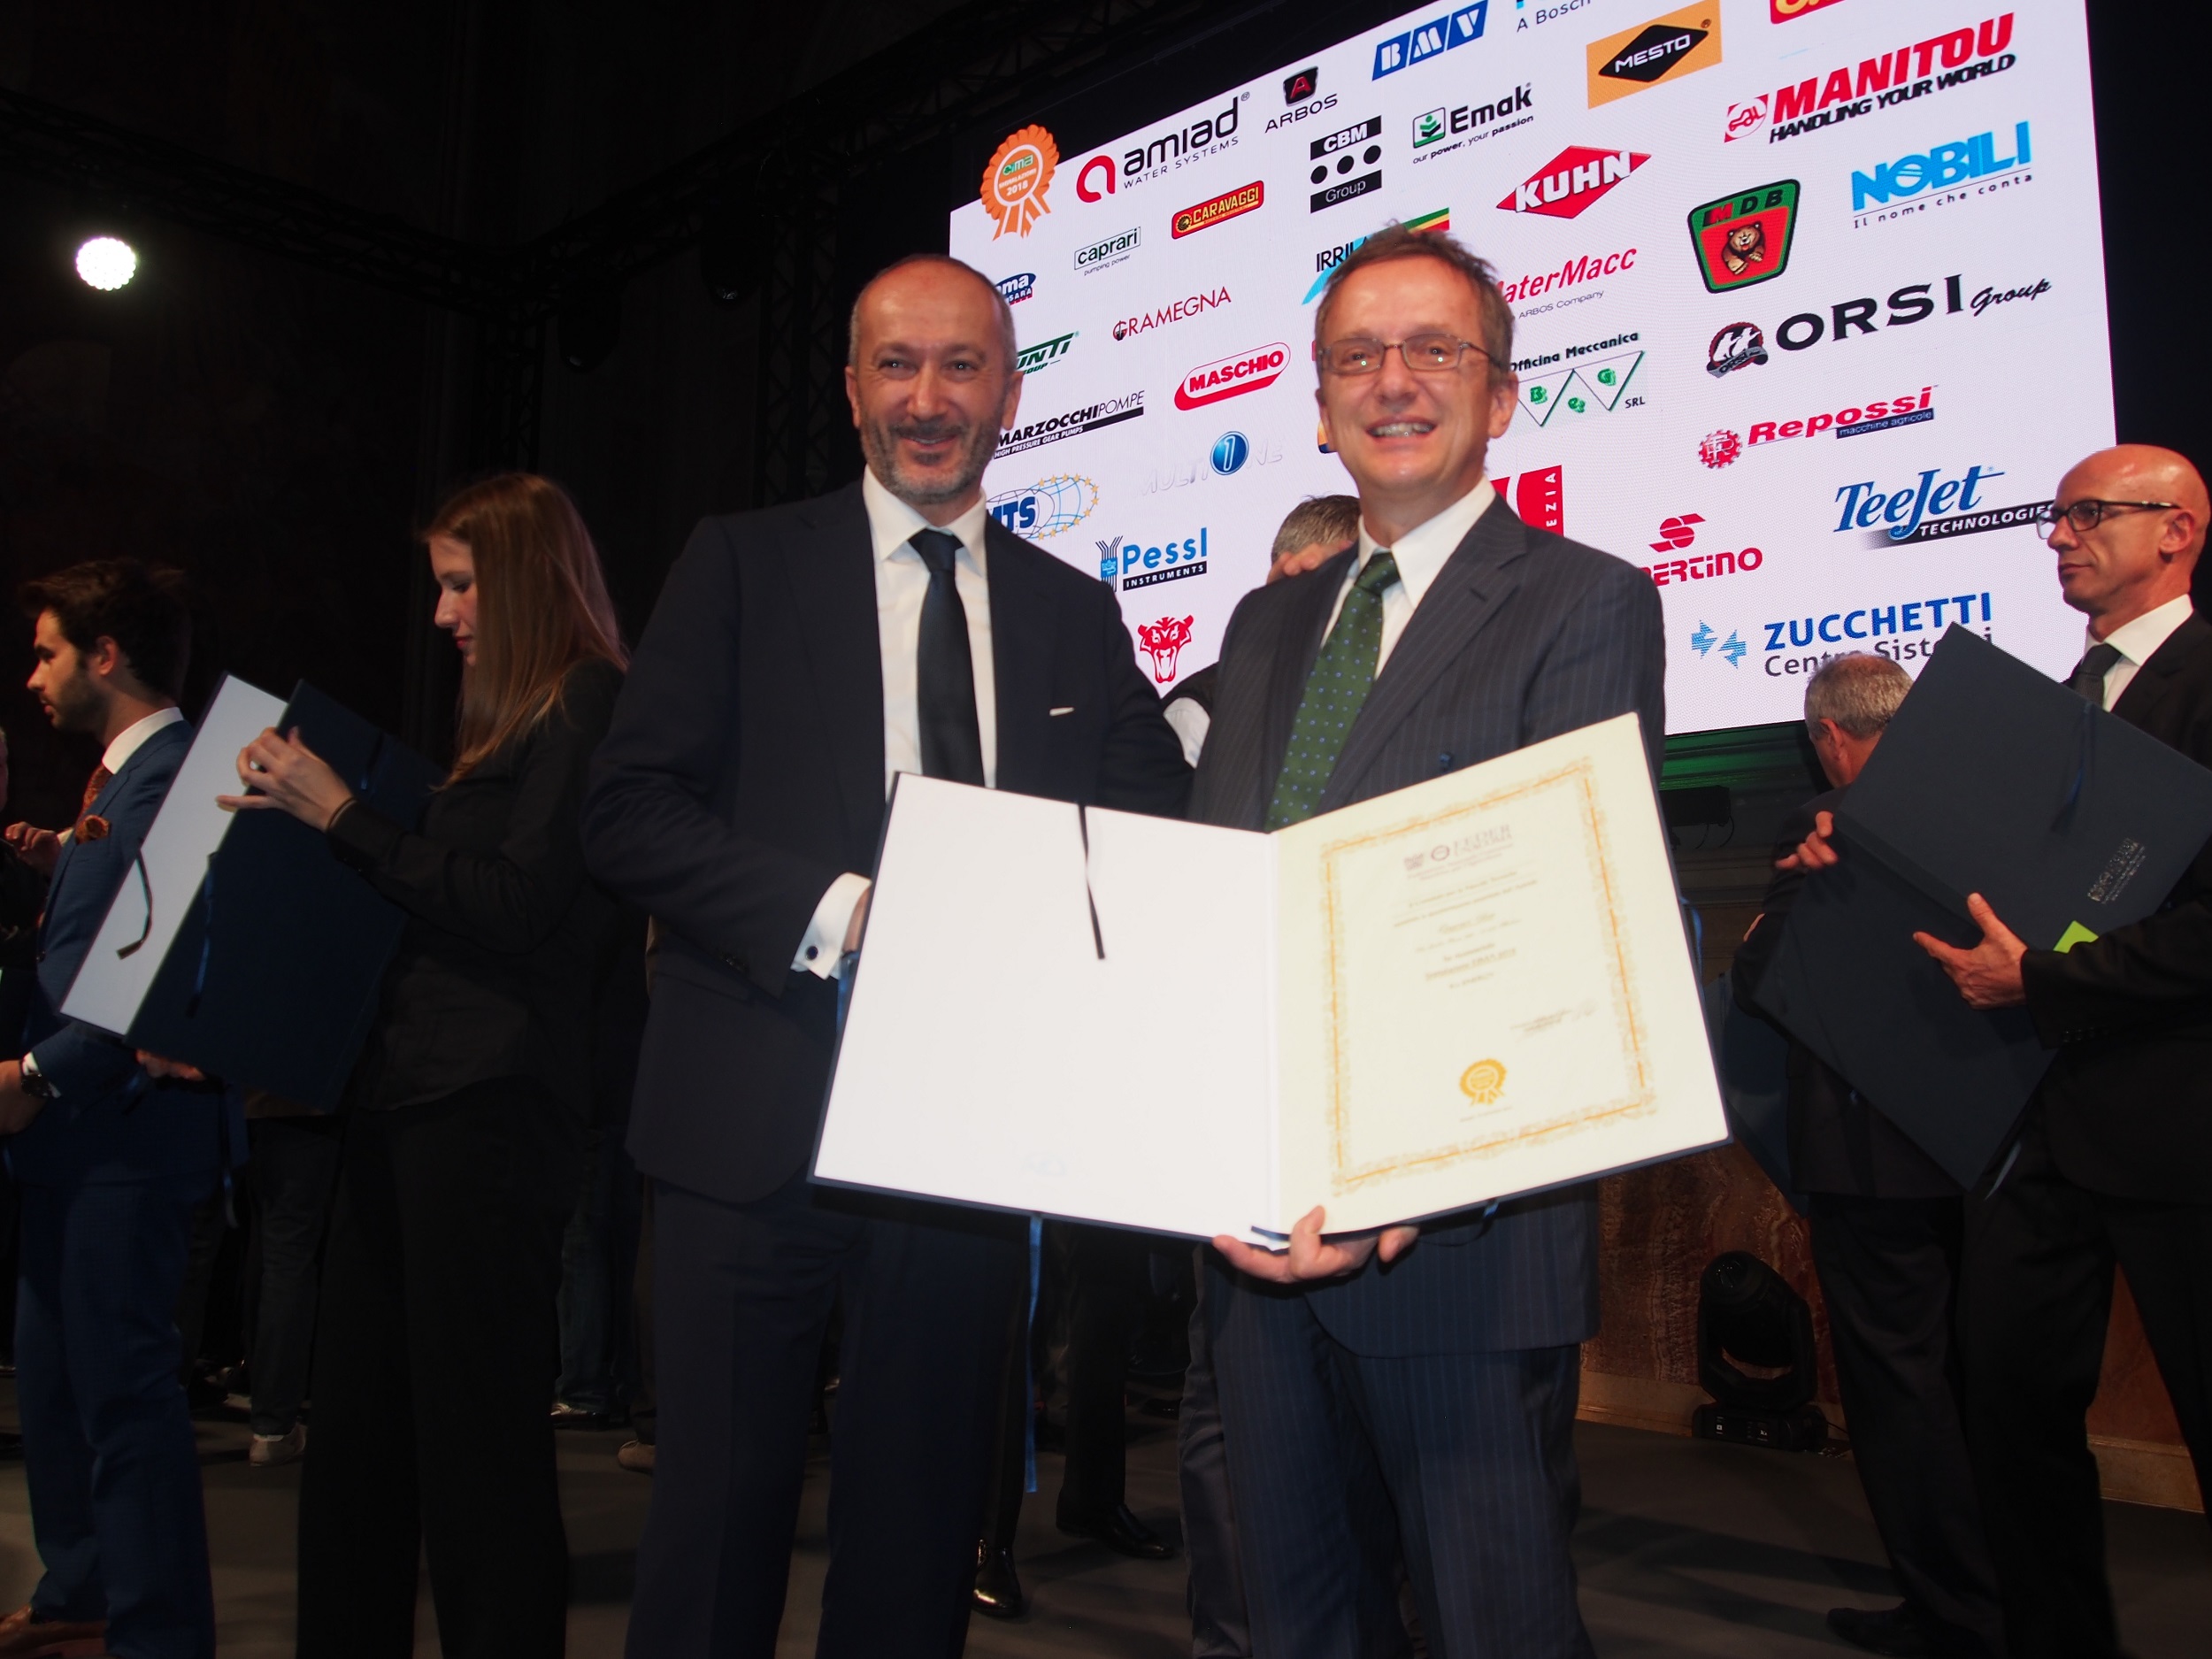 Eng. Gambigliani, head of Caprari product design, received an honourable mention for the Dry Wet System from the President of FederUnaComa, Dr Alessandro Malavolti.